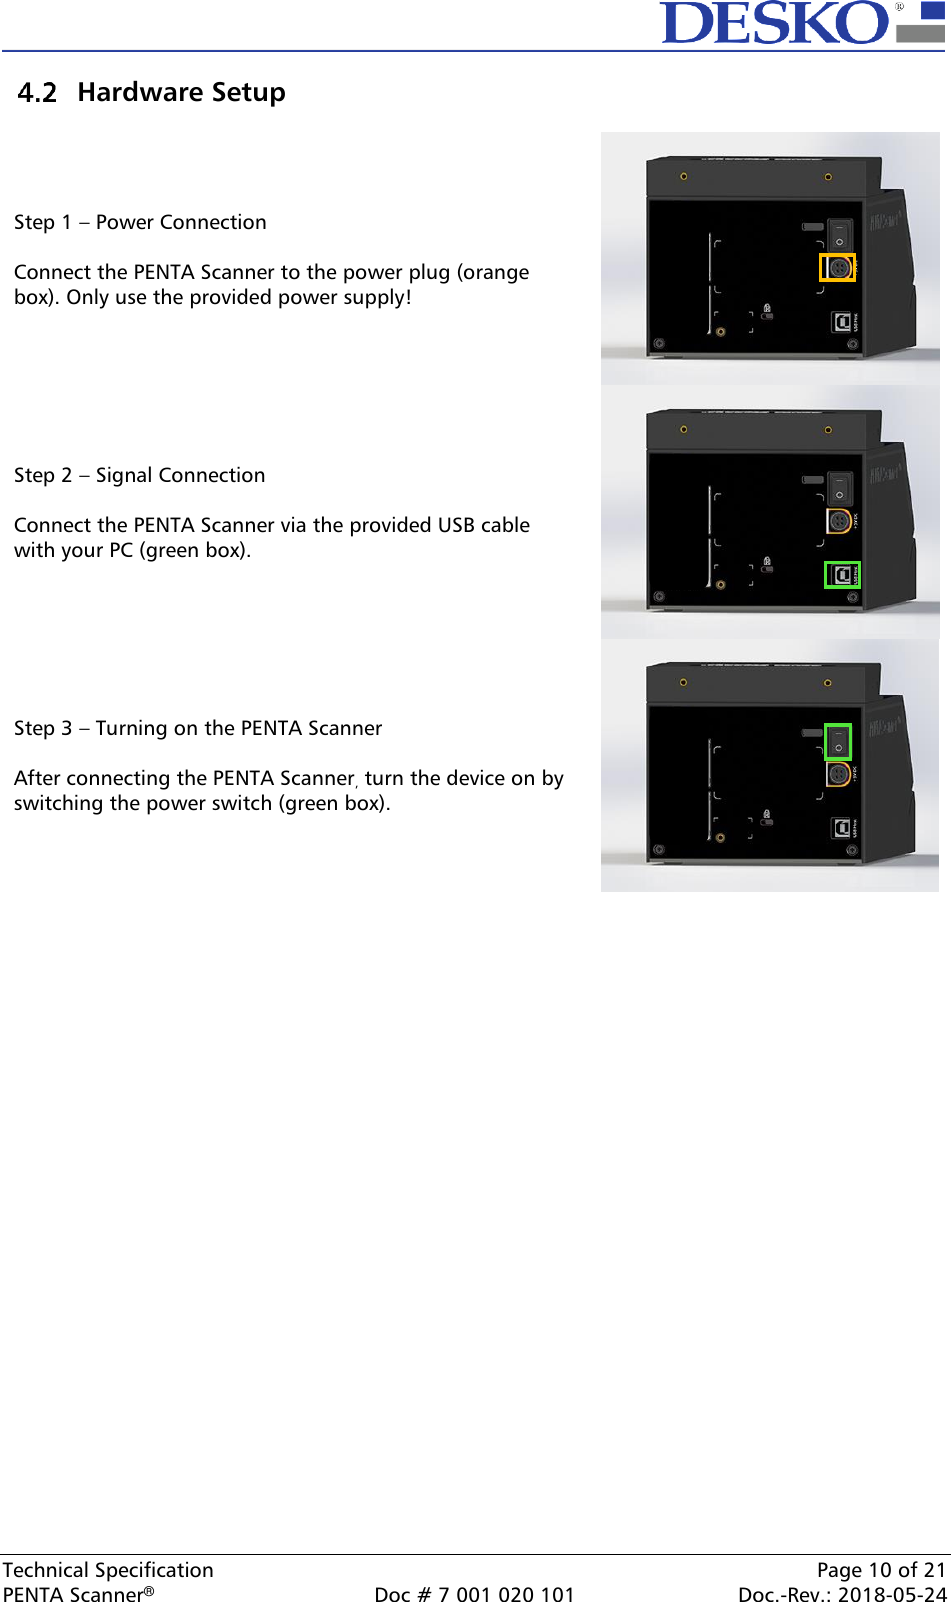  Technical Specification    Page 10 of 21 PENTA Scanner®  Doc # 7 001 020 101  Doc.-Rev.: 2018-05-24  Hardware Setup  Step 1 – Power Connection  Connect the PENTA Scanner to the power plug (orange box). Only use the provided power supply!   Step 2 – Signal Connection  Connect the PENTA Scanner via the provided USB cable with your PC (green box).   Step 3 – Turning on the PENTA Scanner  After connecting the PENTA Scanner, turn the device on by switching the power switch (green box).   